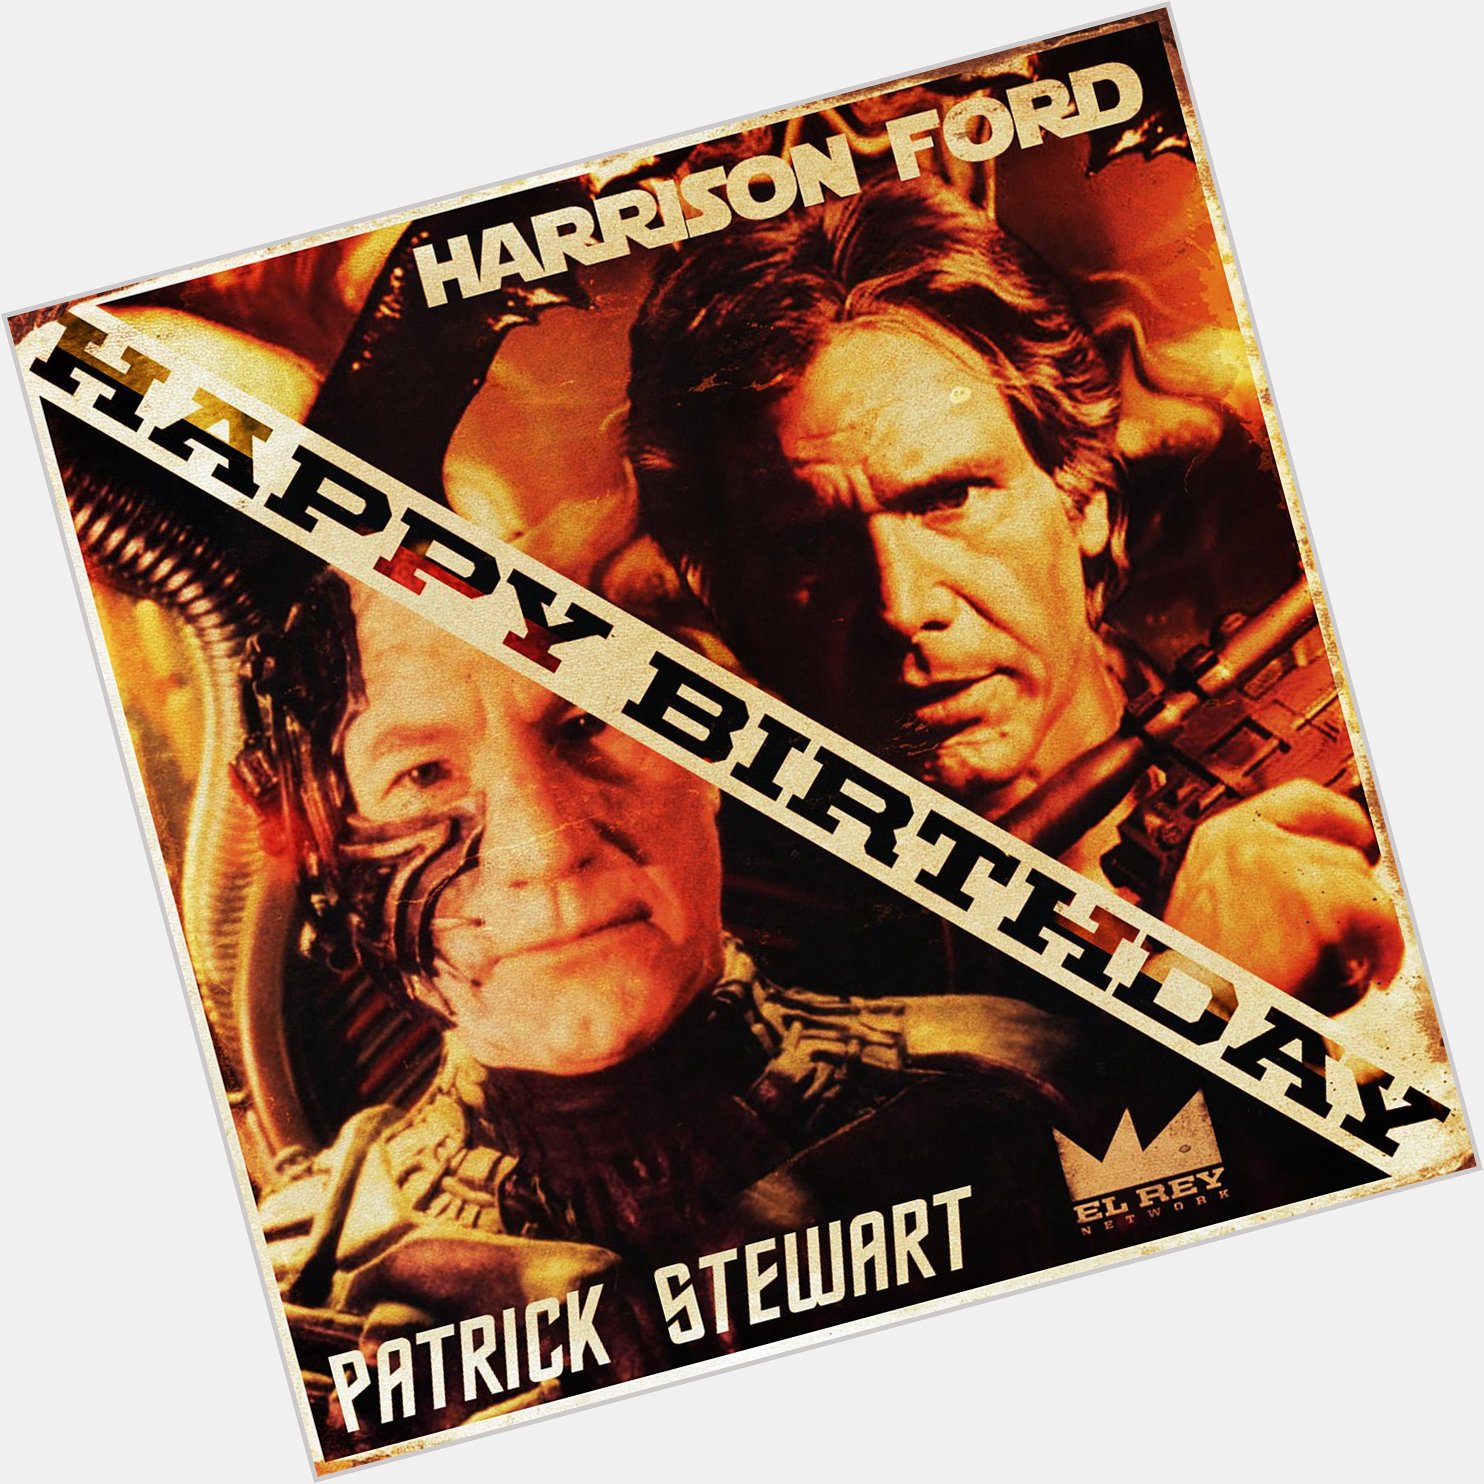 Happy birthday to two of the greatest spaceship captains ever, Patrick Stewart & Harrison Ford!  